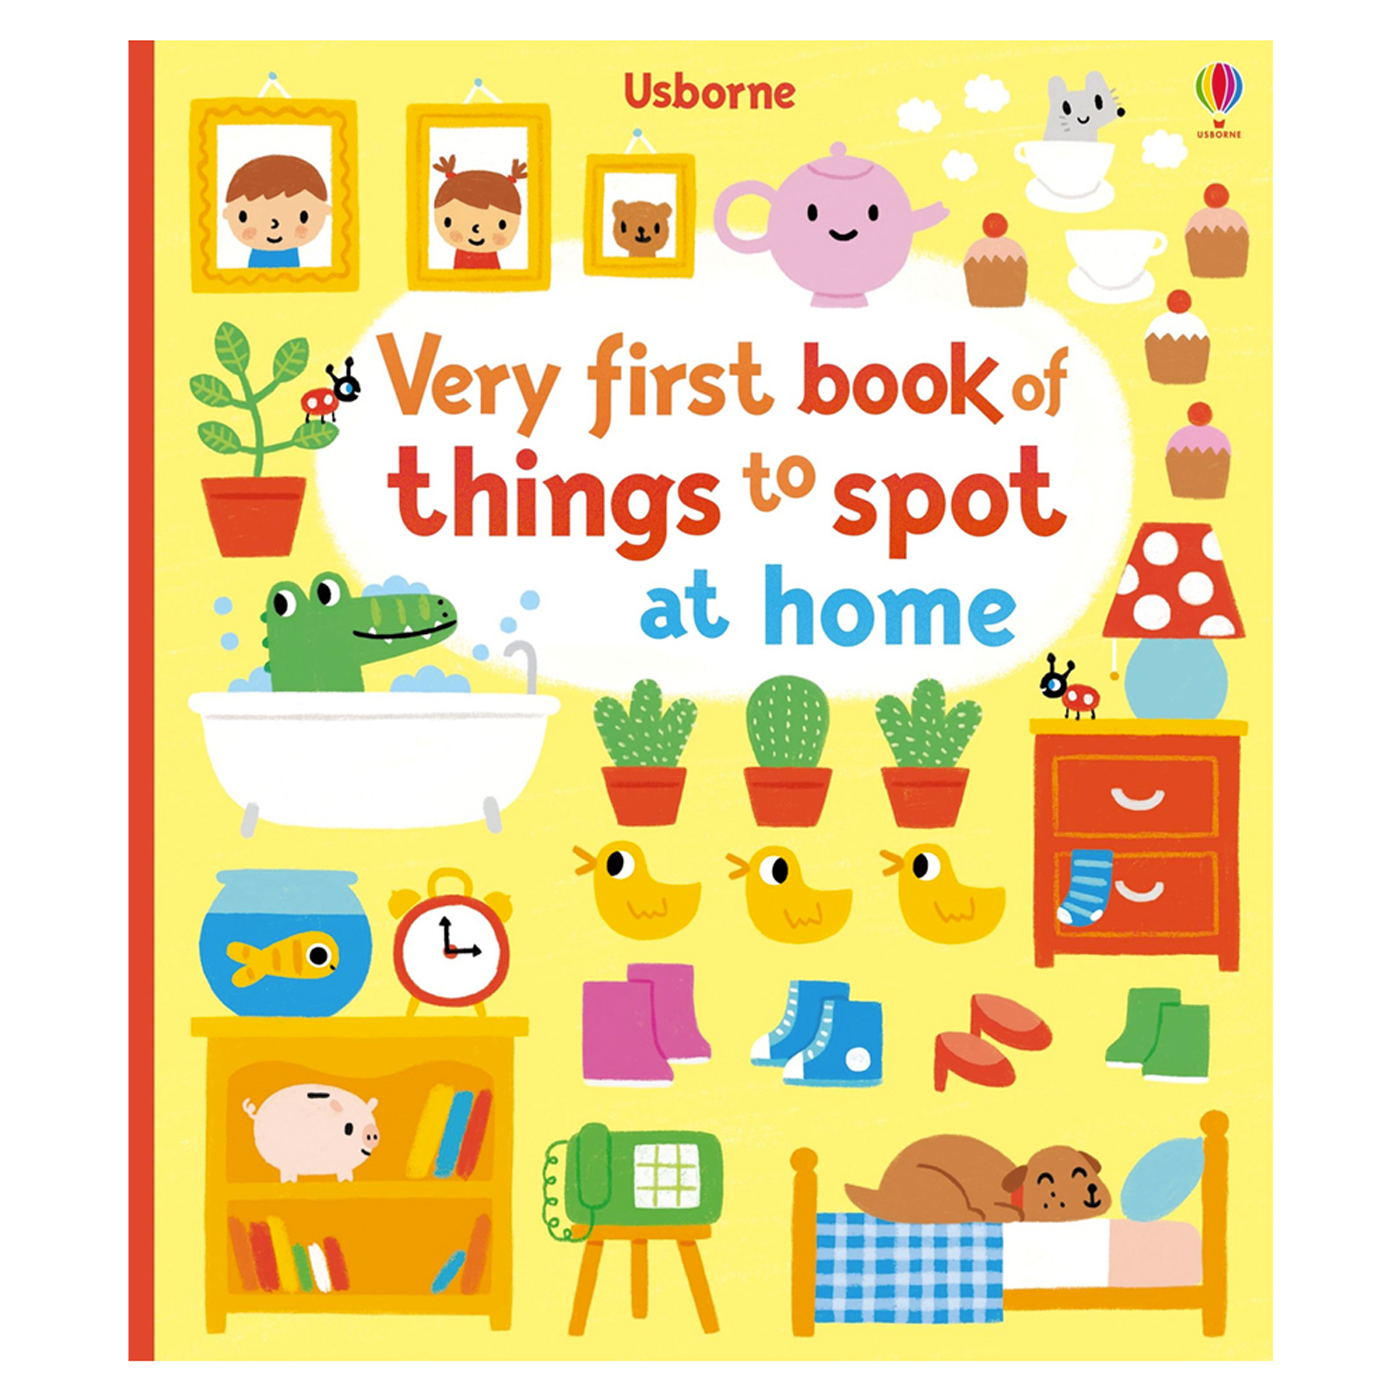  Very first book things to spot at home